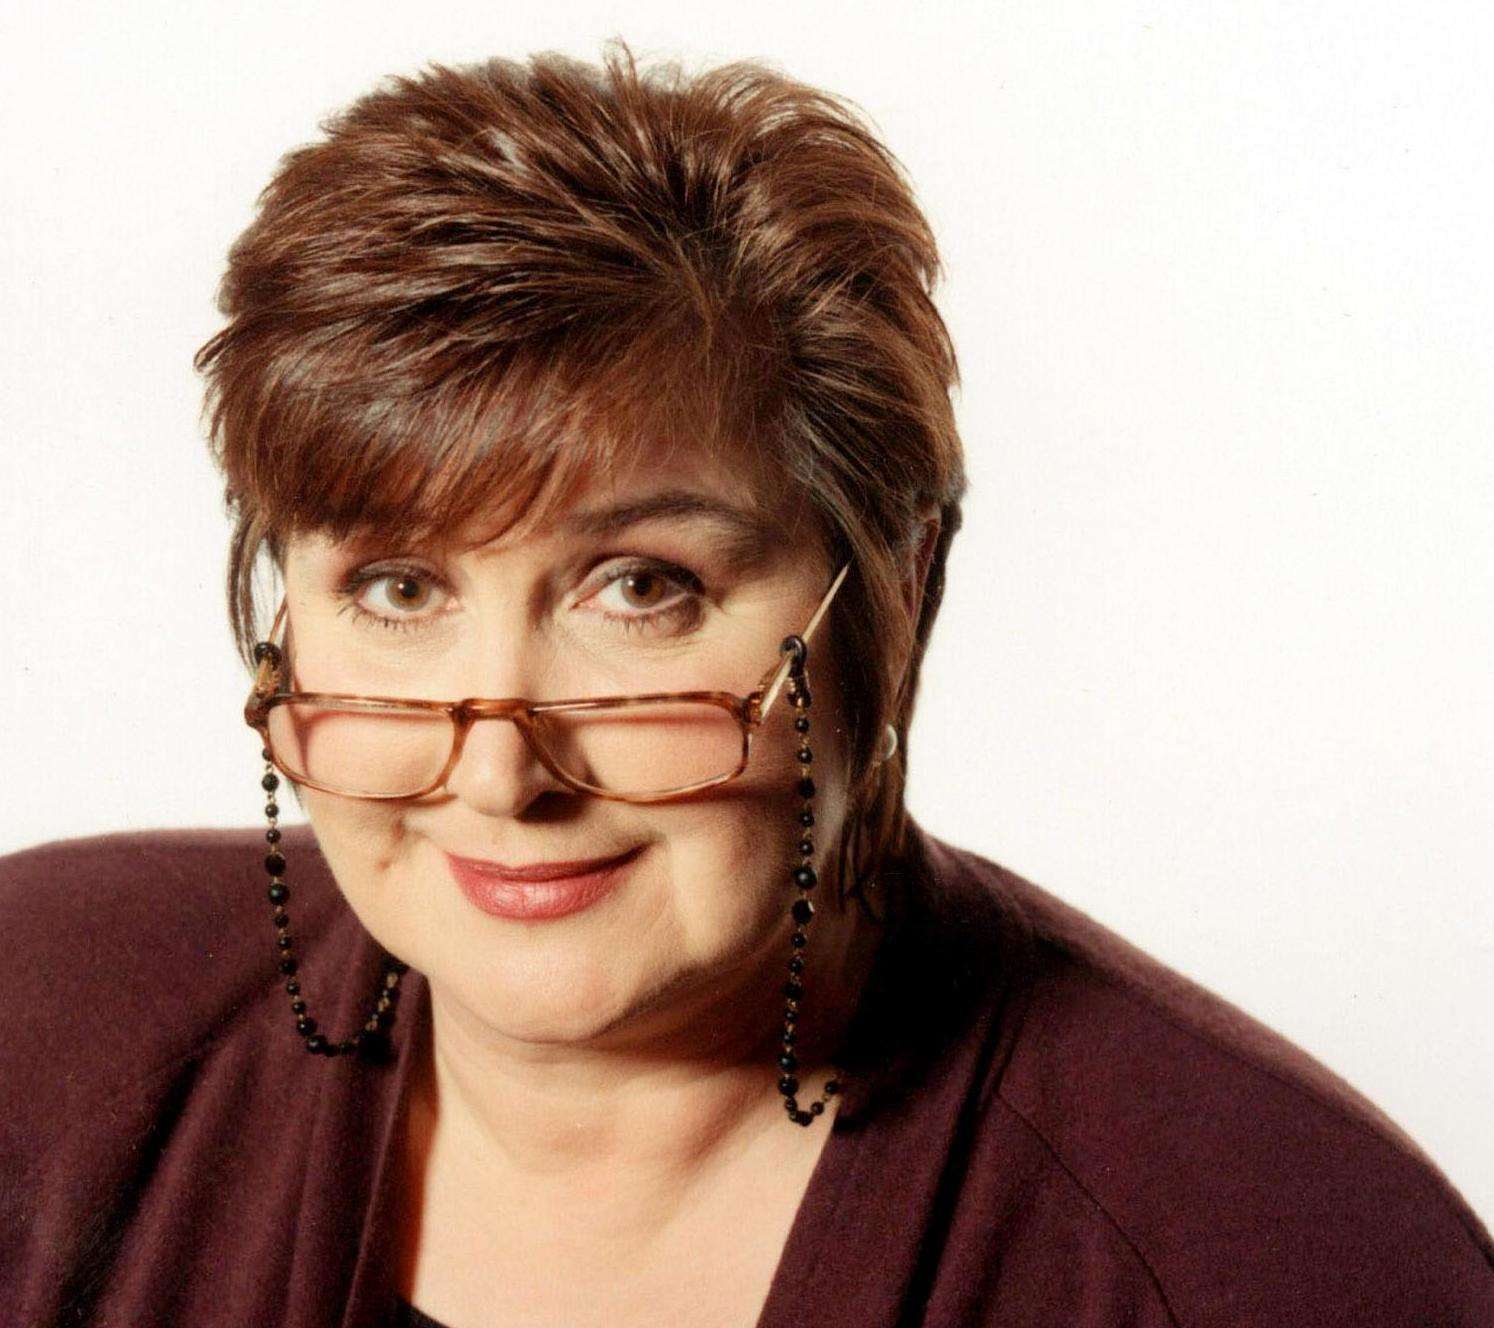 Broadcaster and author Jenni Murray